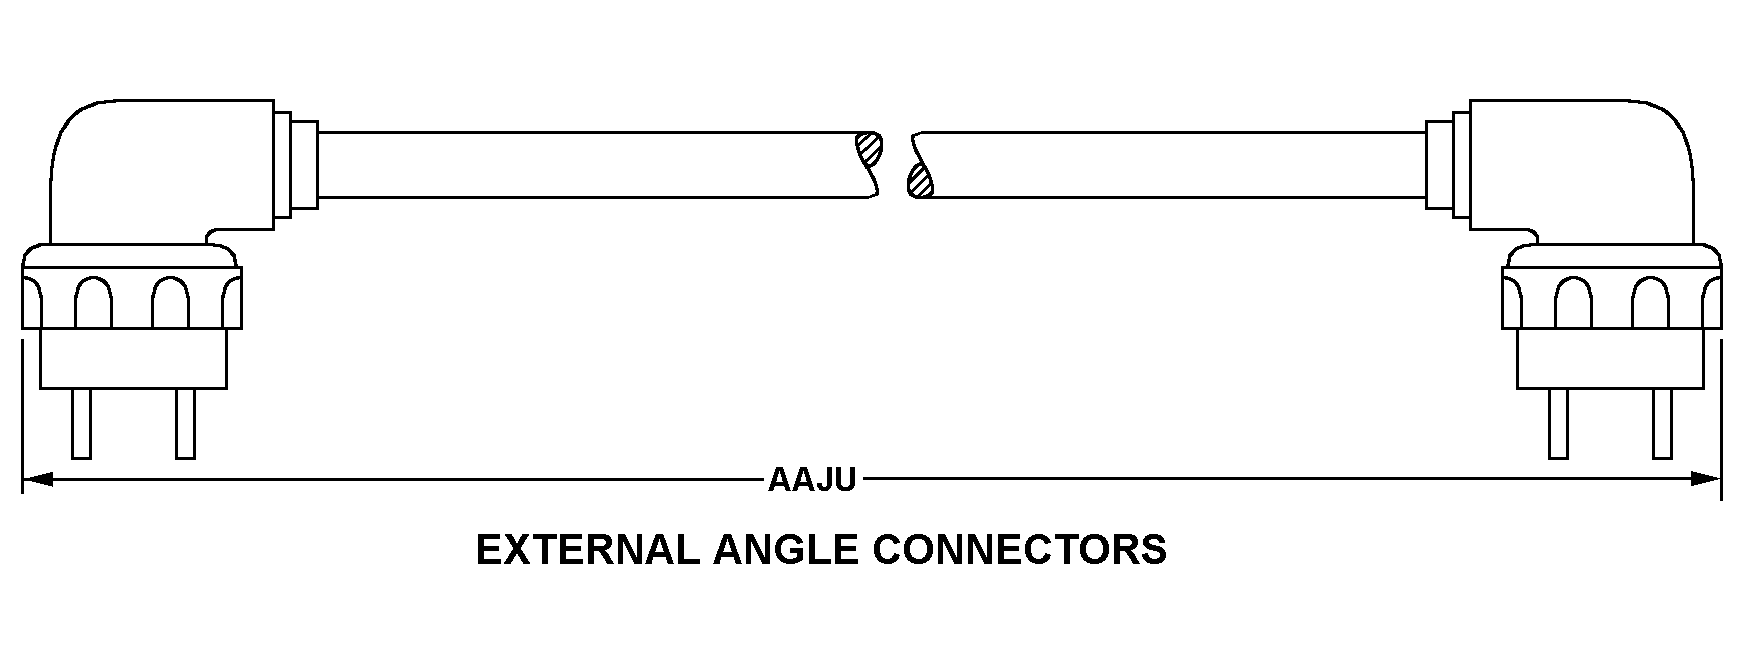 EXTERNAL ANGLE CONNECTORS style nsn 6150-01-352-5246